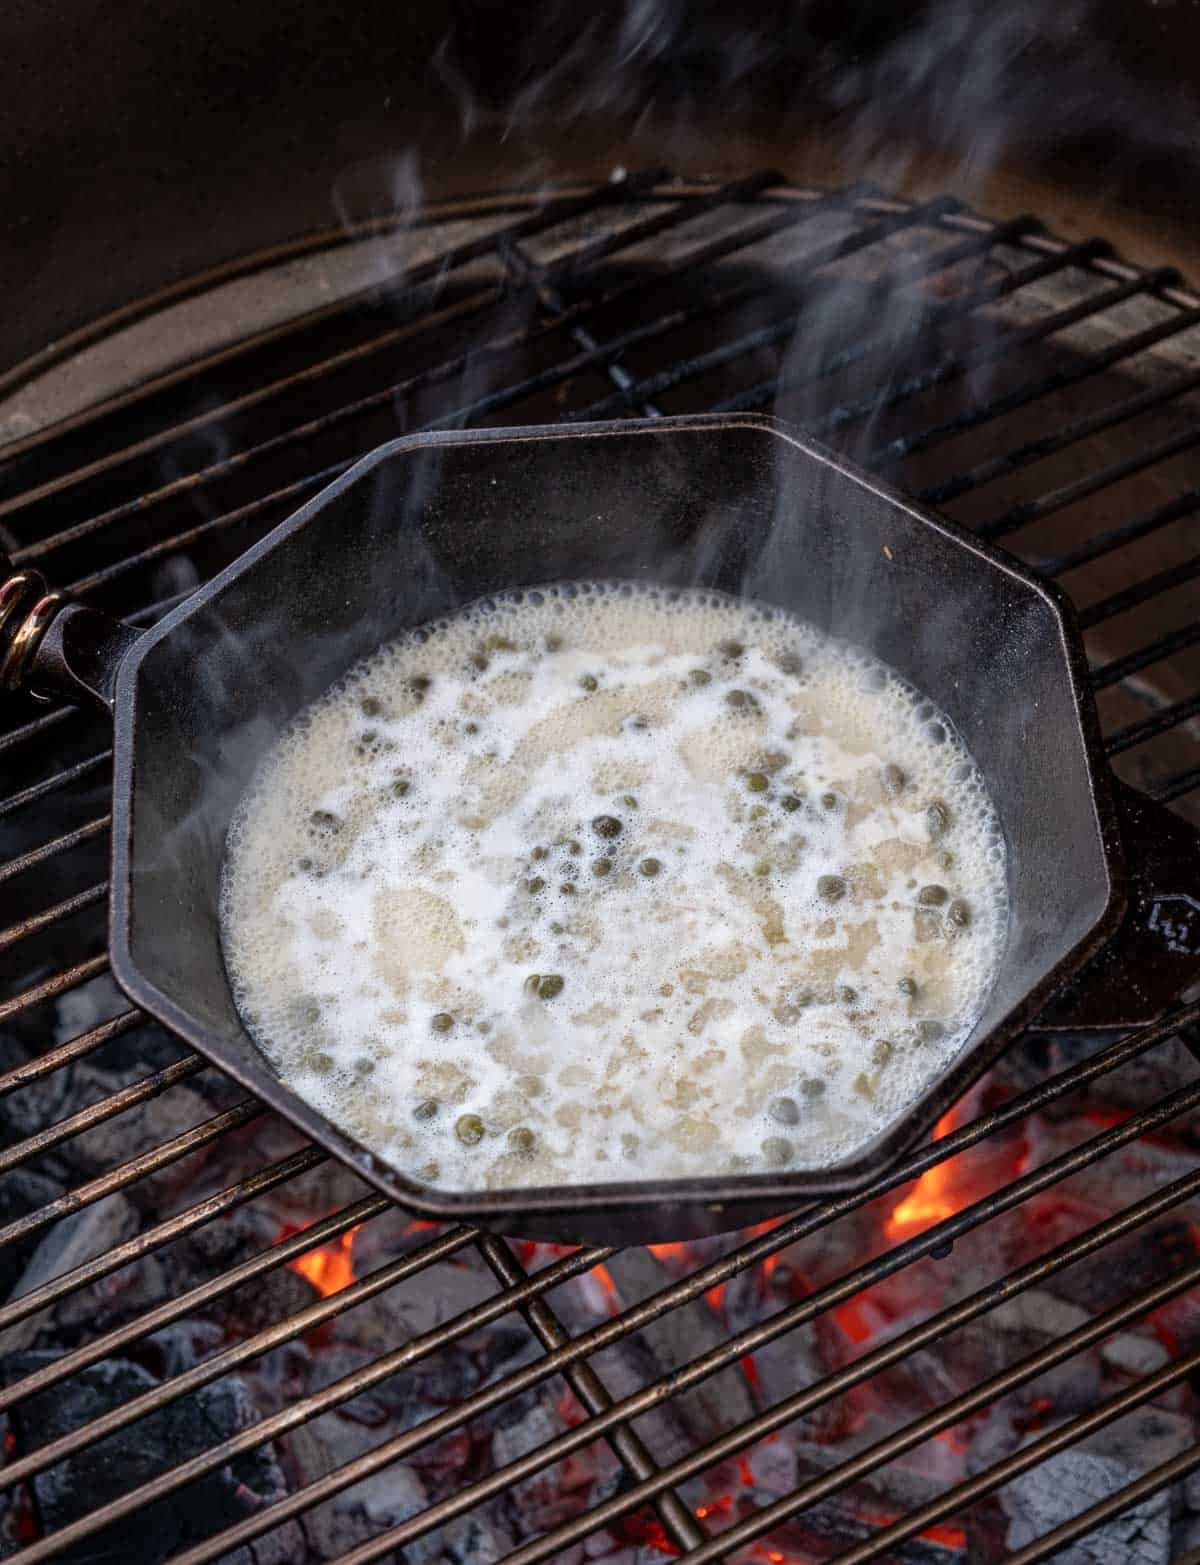 White wine butter sauce reduced in a cast iron pan over direct heat on the grill.